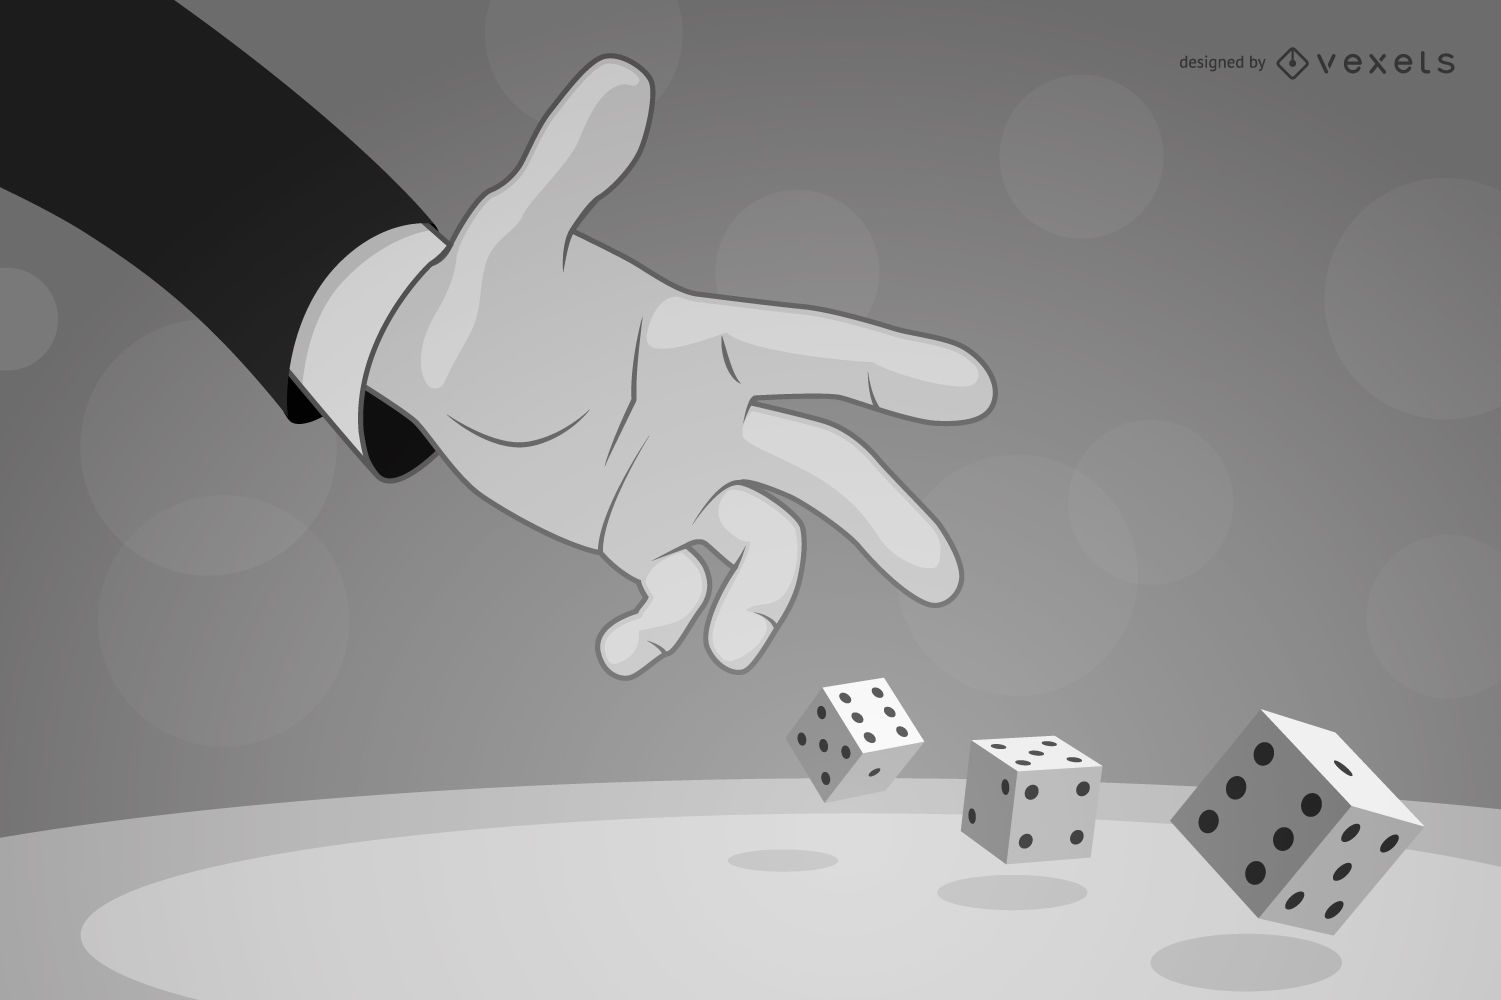 https://images.vexels.com/content/73831/preview/hand-throwing-dices-in-black-and-white-3c36c9.png